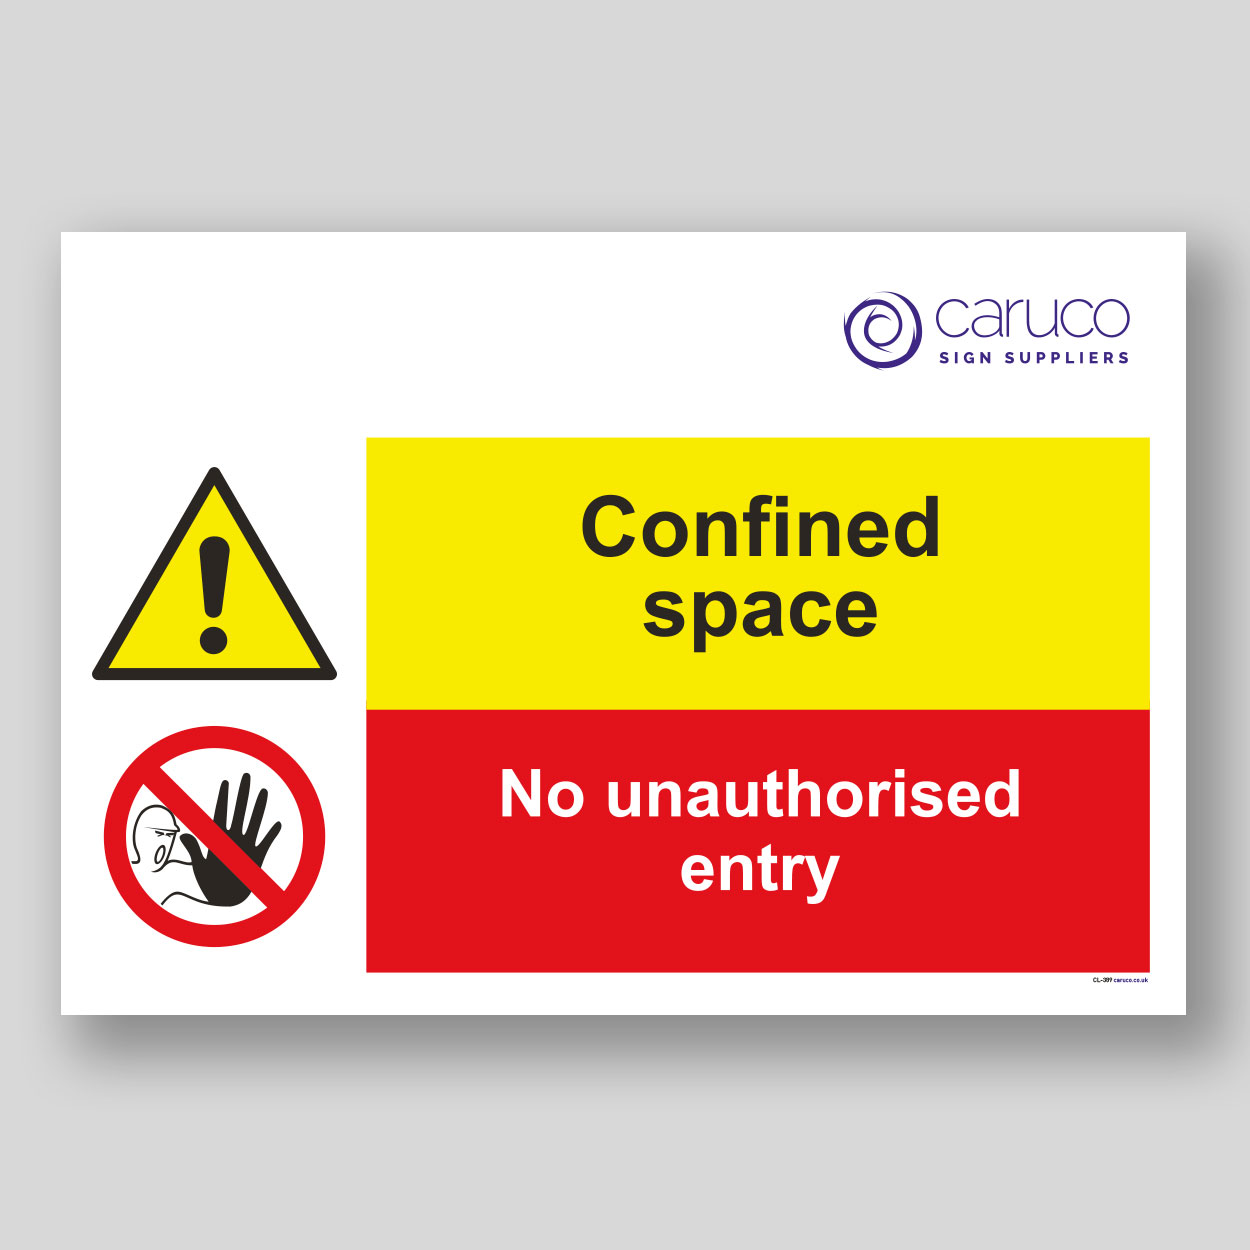 CL-389 Confined space - no unauthorised entry